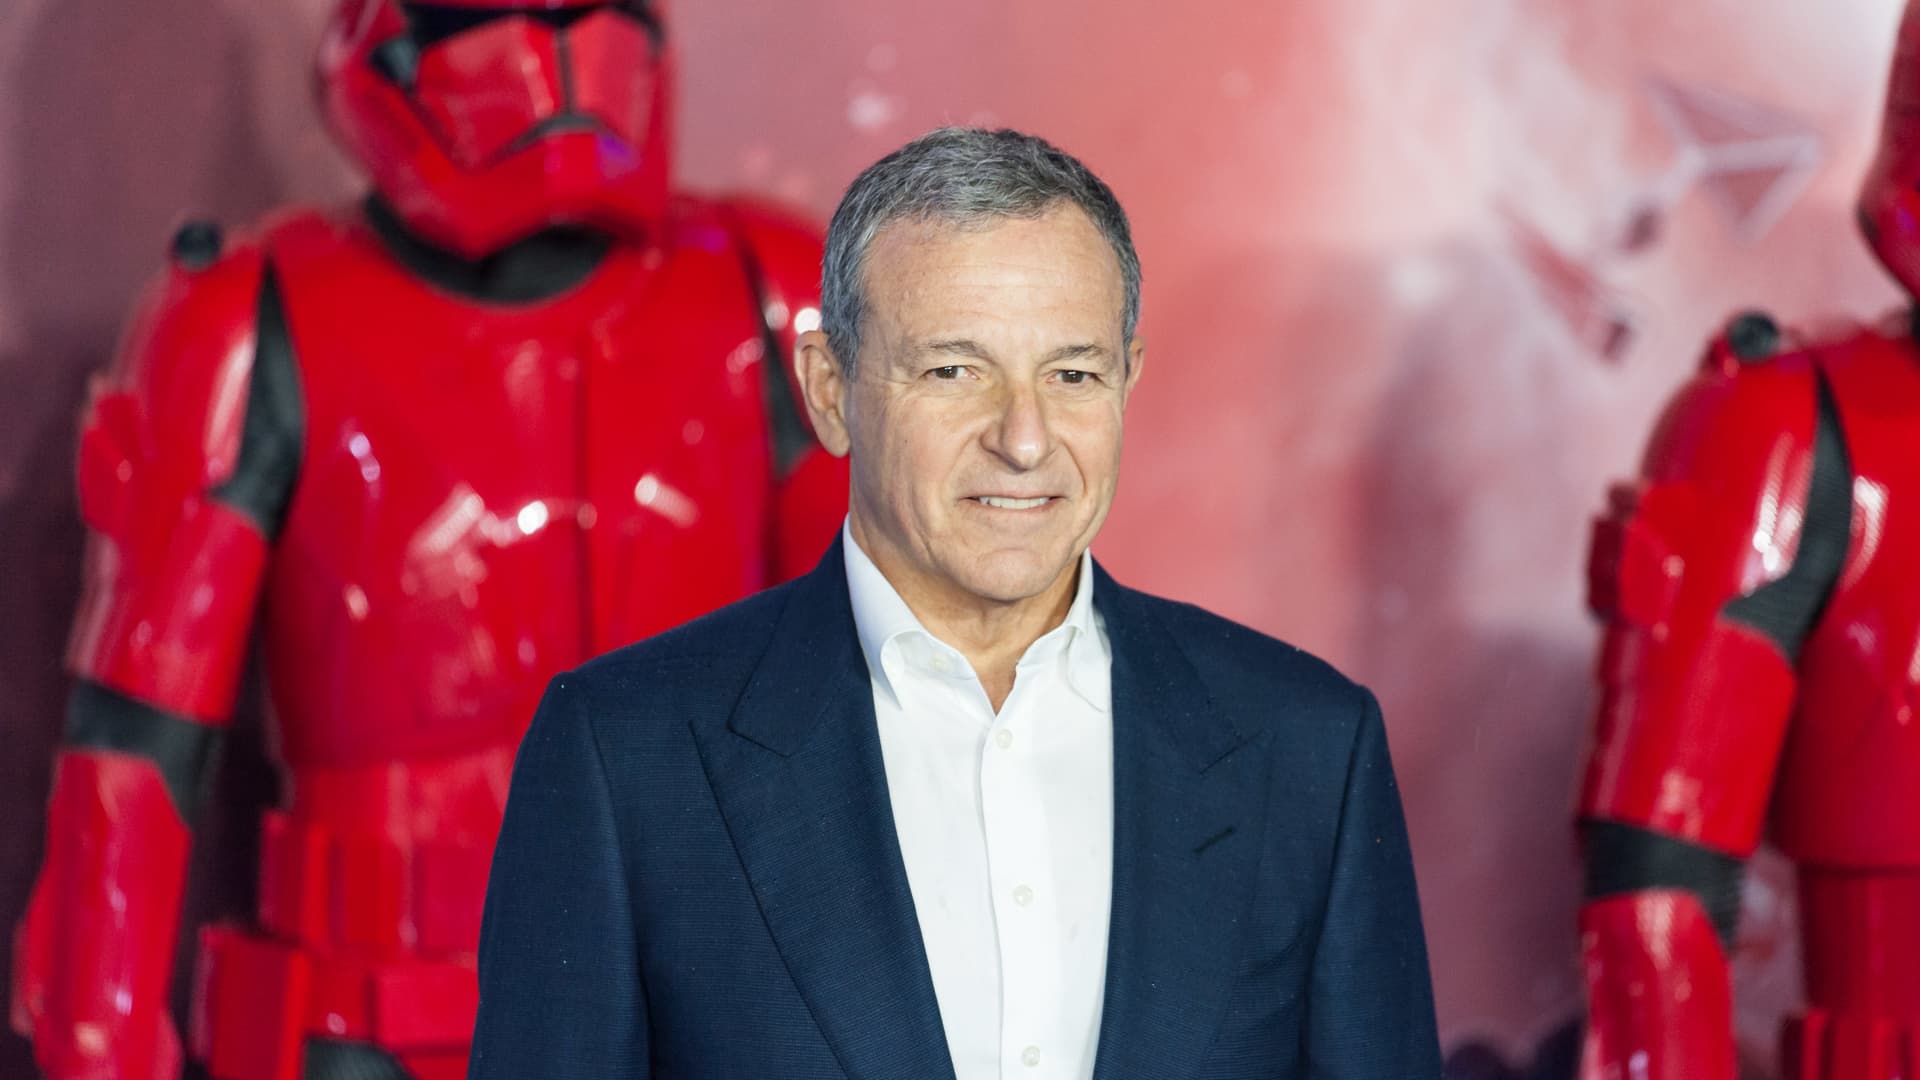 Disney board reached out to Iger on Friday following concerns over earnings